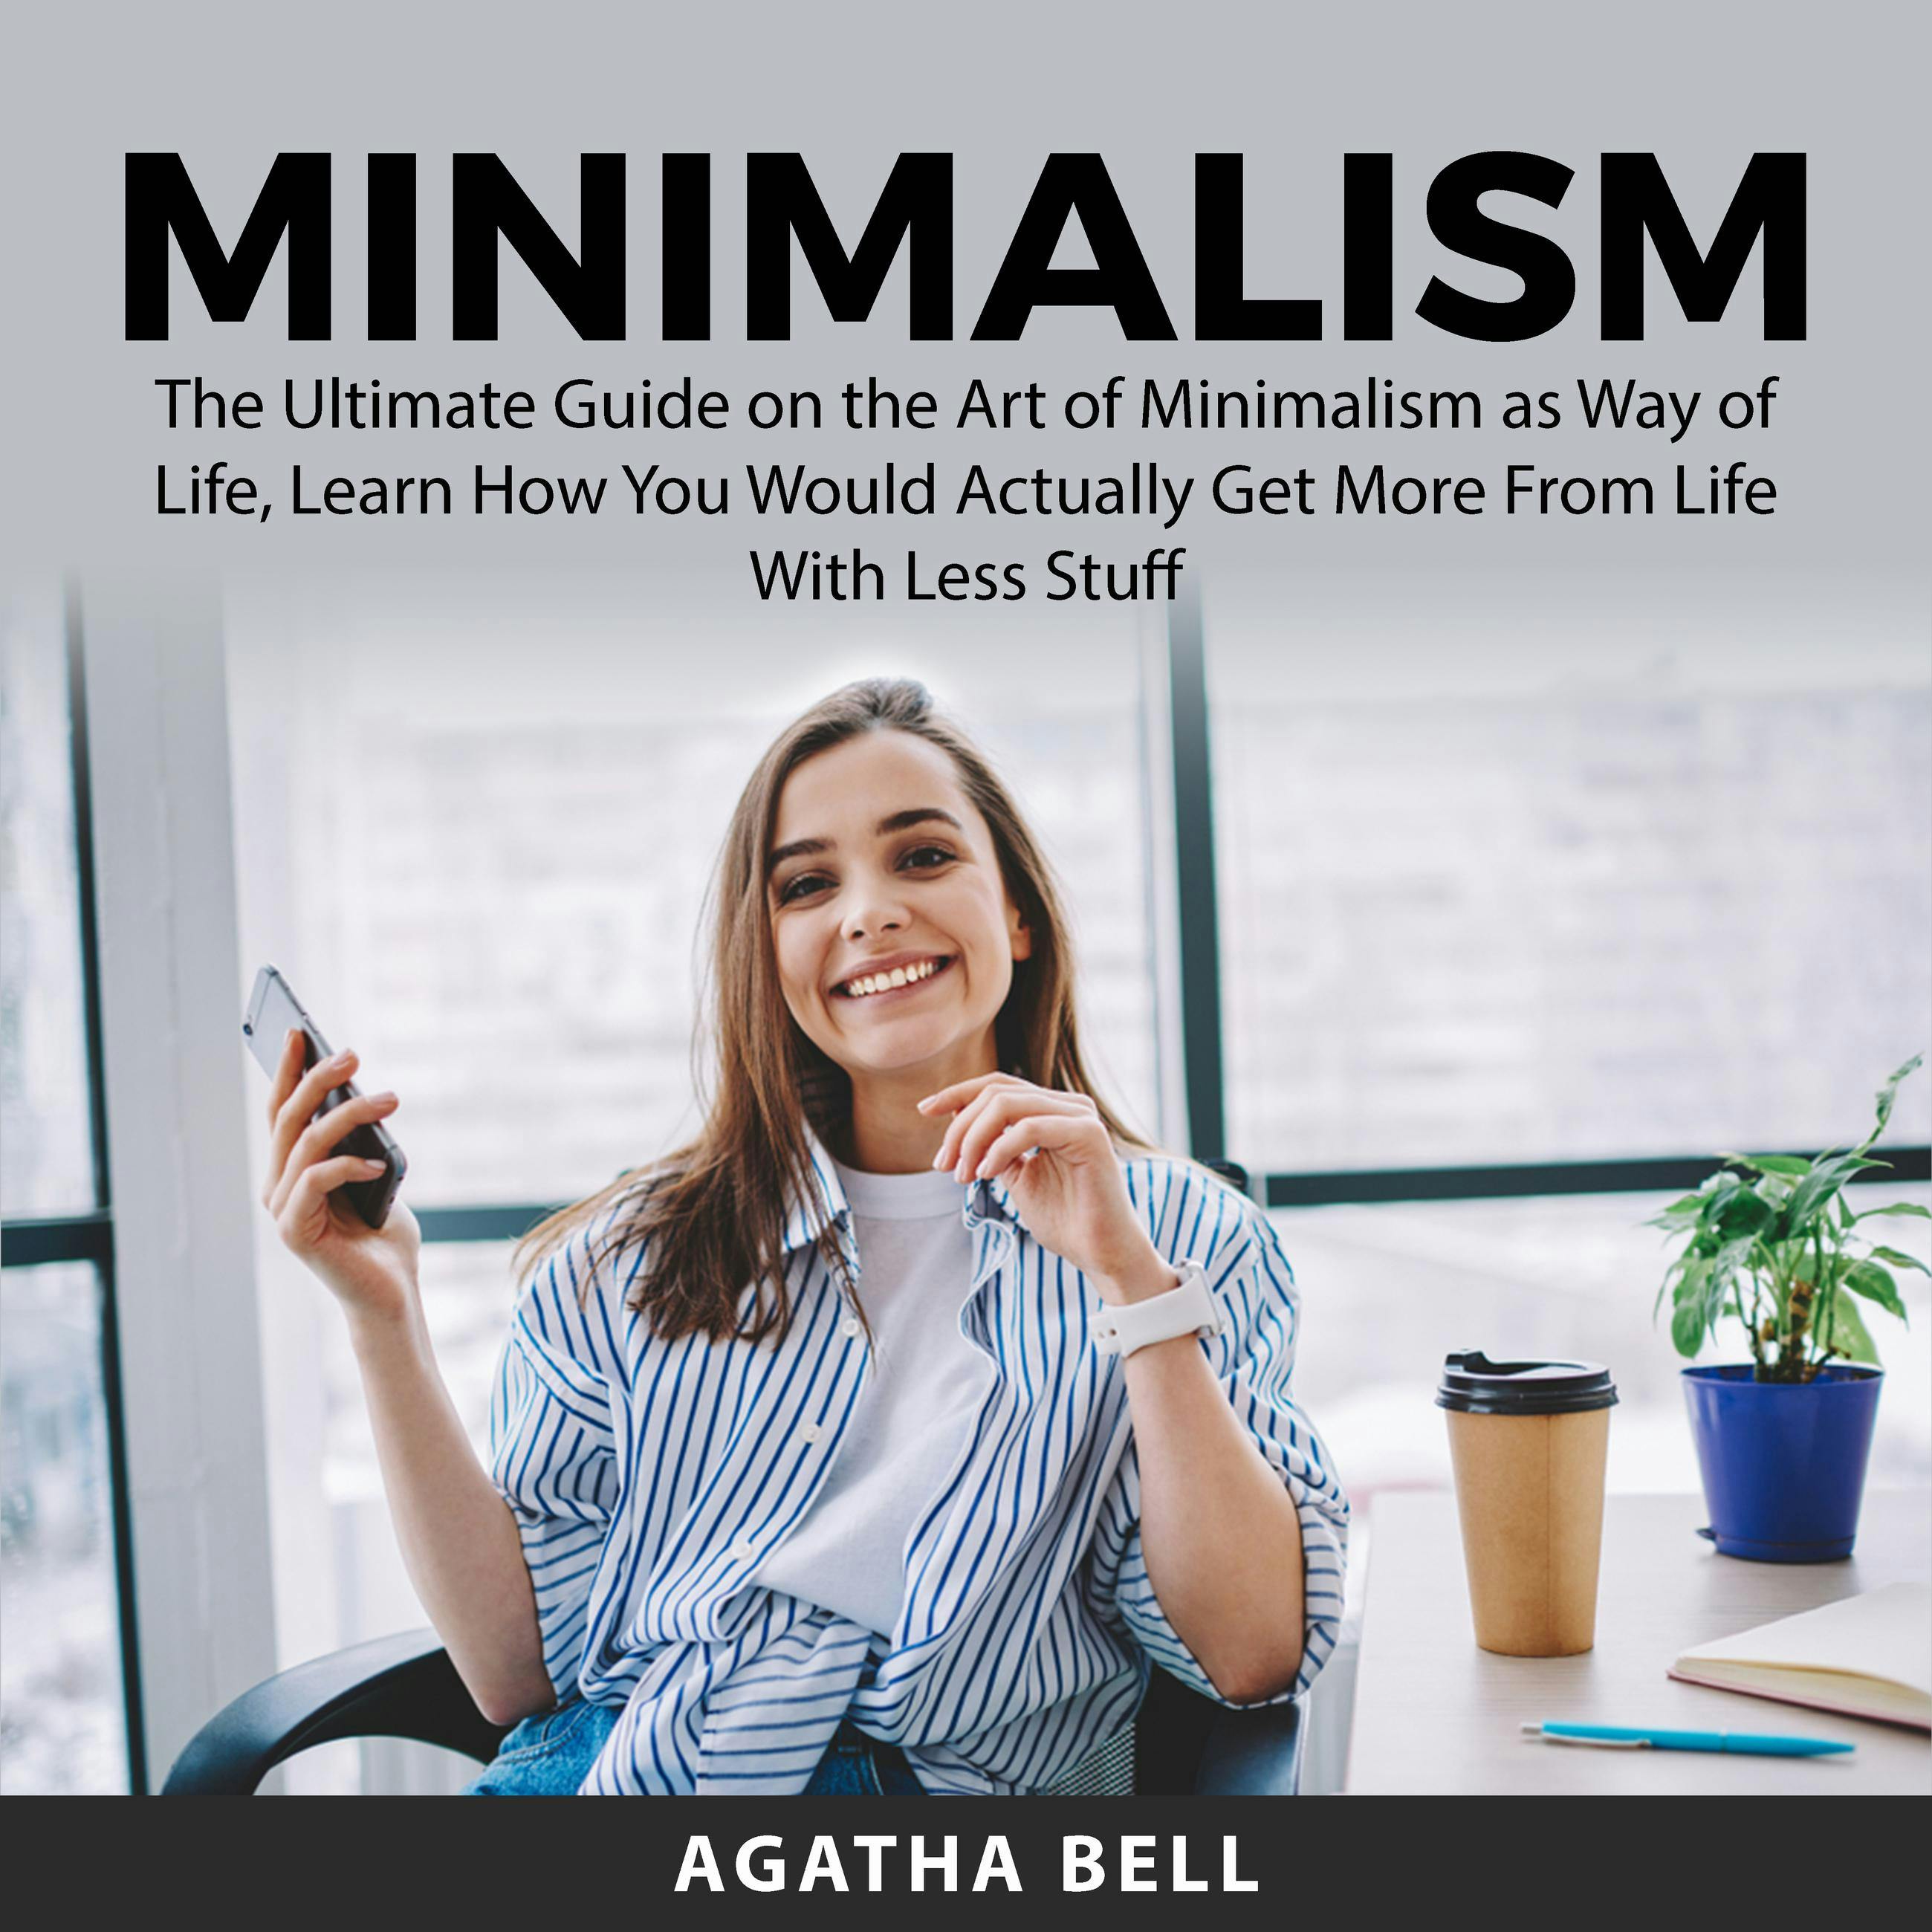 Minimalism: The Ultimate Guide on the Art of Minimalism as Way of Life, Learn How You Would Actually Get More From Life With Less Stuff - undefined